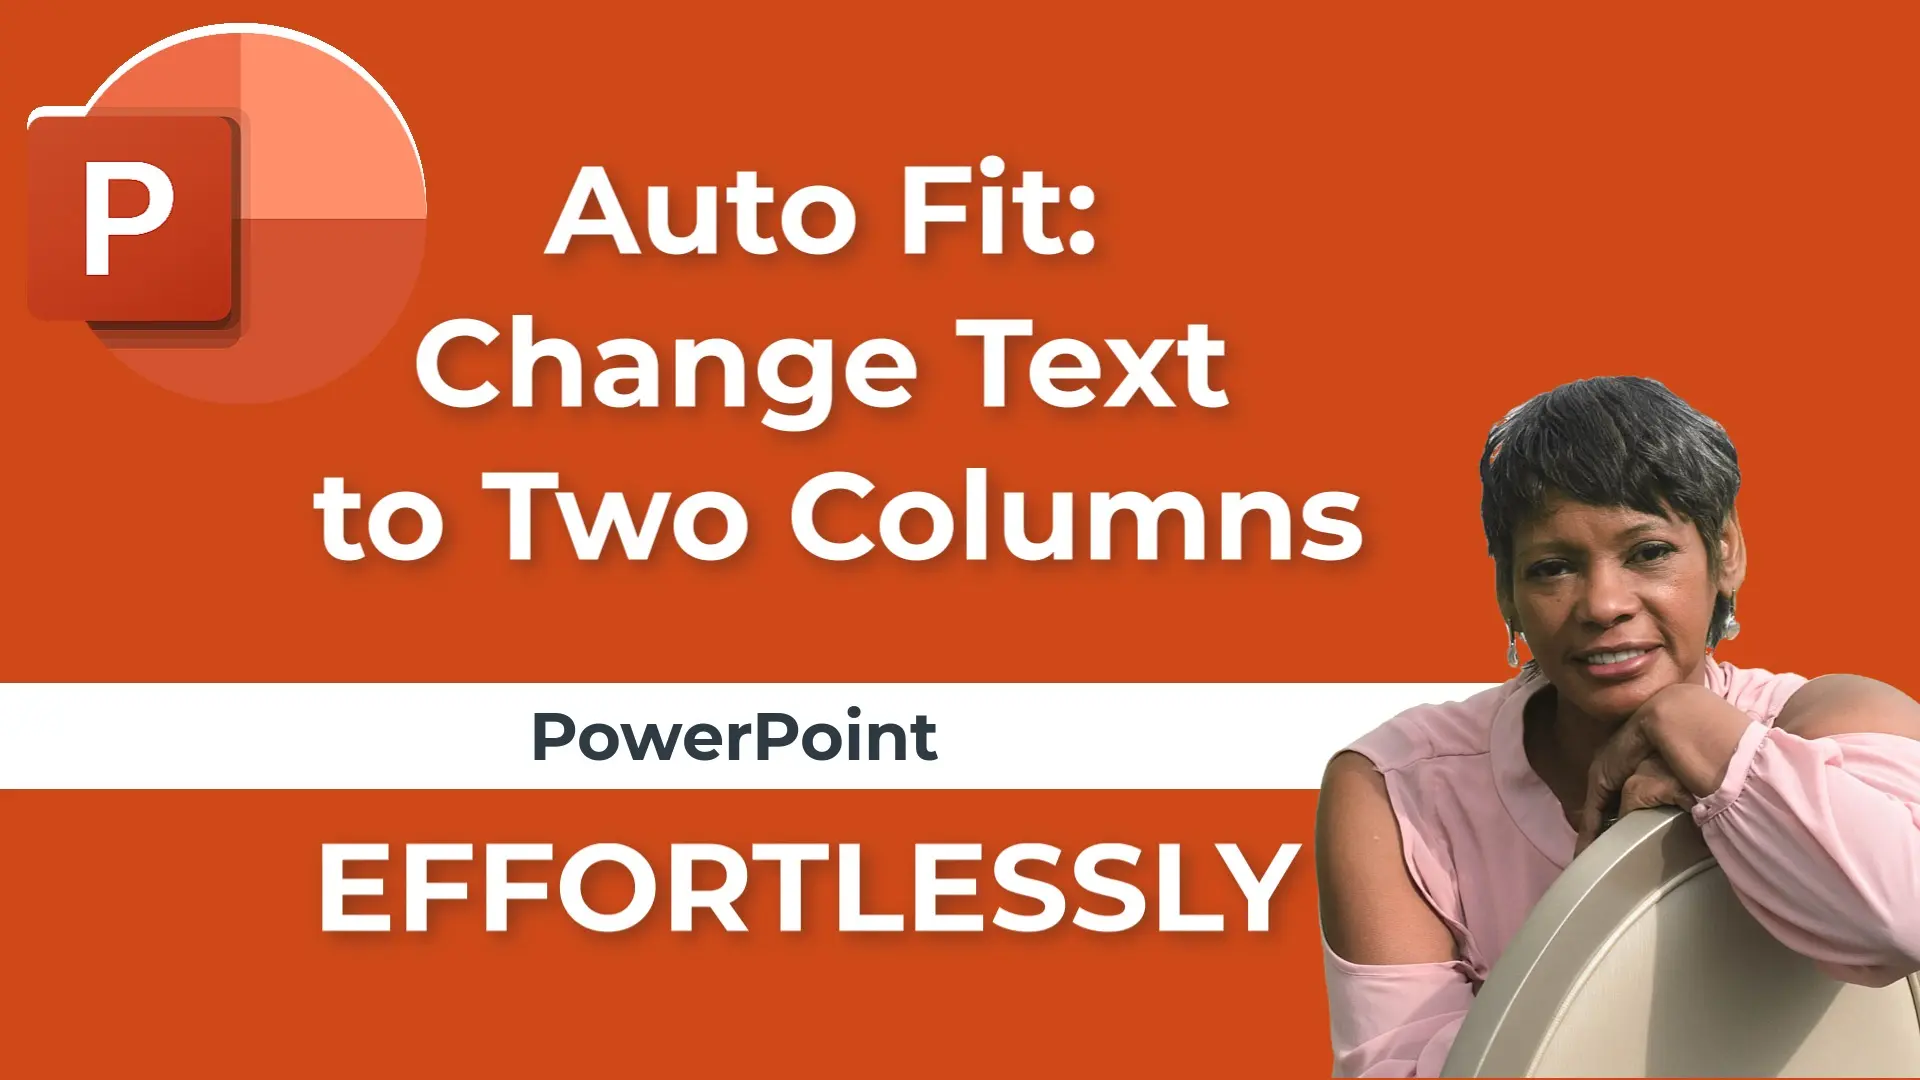 PowerPoint: Auto Fit: Change Text to Two Columns Effortlessly